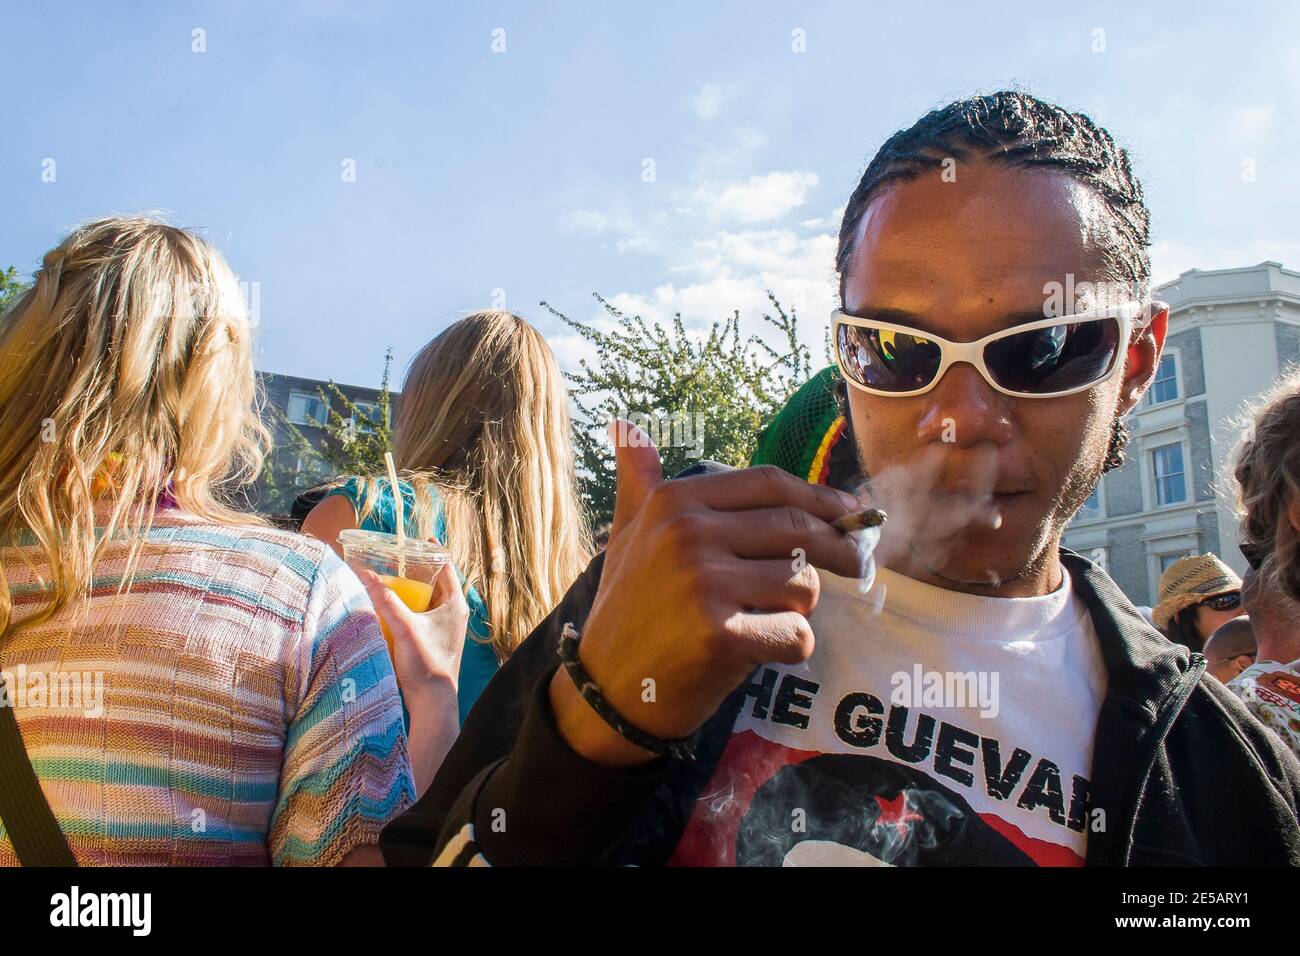 Young boy smoking in the crowd at Notting Hill Carnival Stock Photo